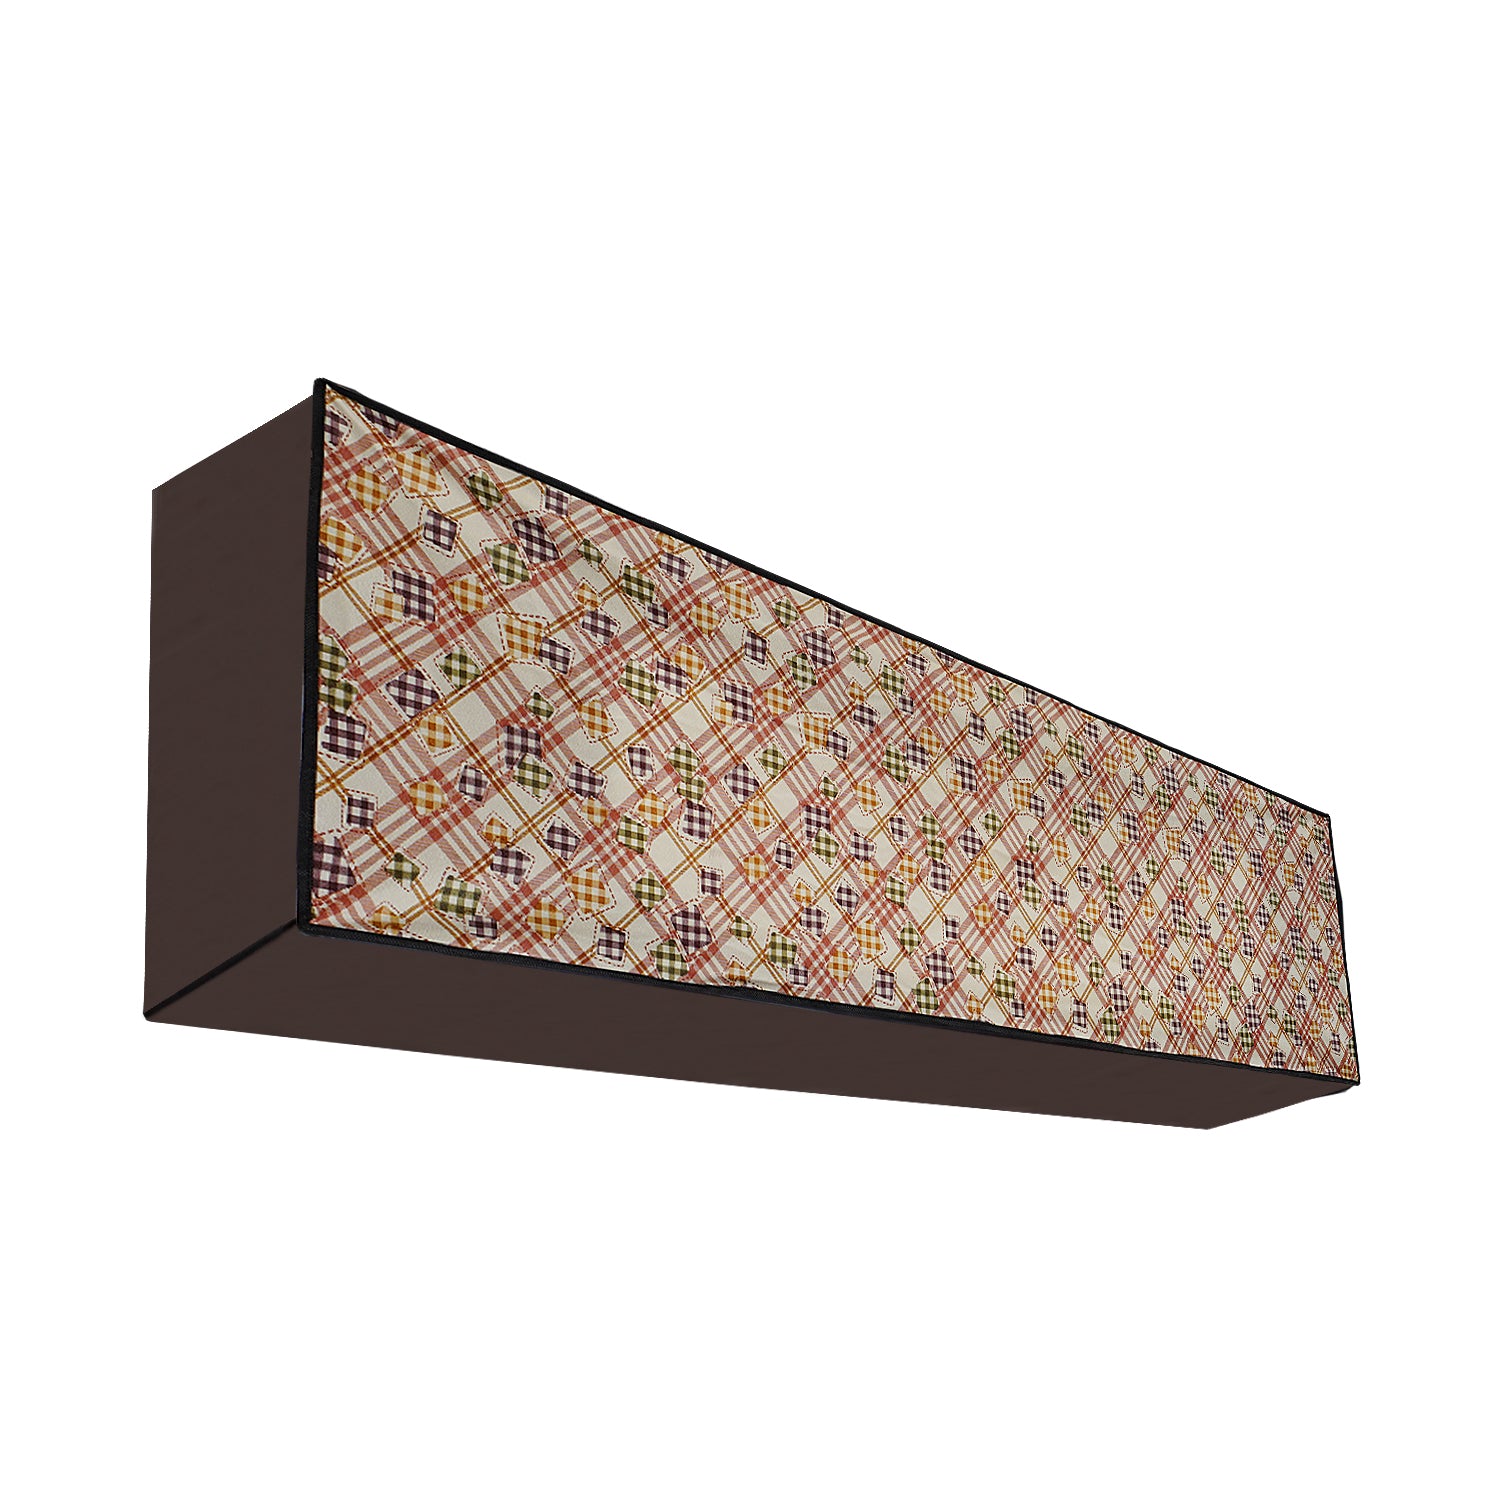 Waterproof and Dustproof Split Indoor AC Cover, CA11 - Dream Care Furnishings Private Limited